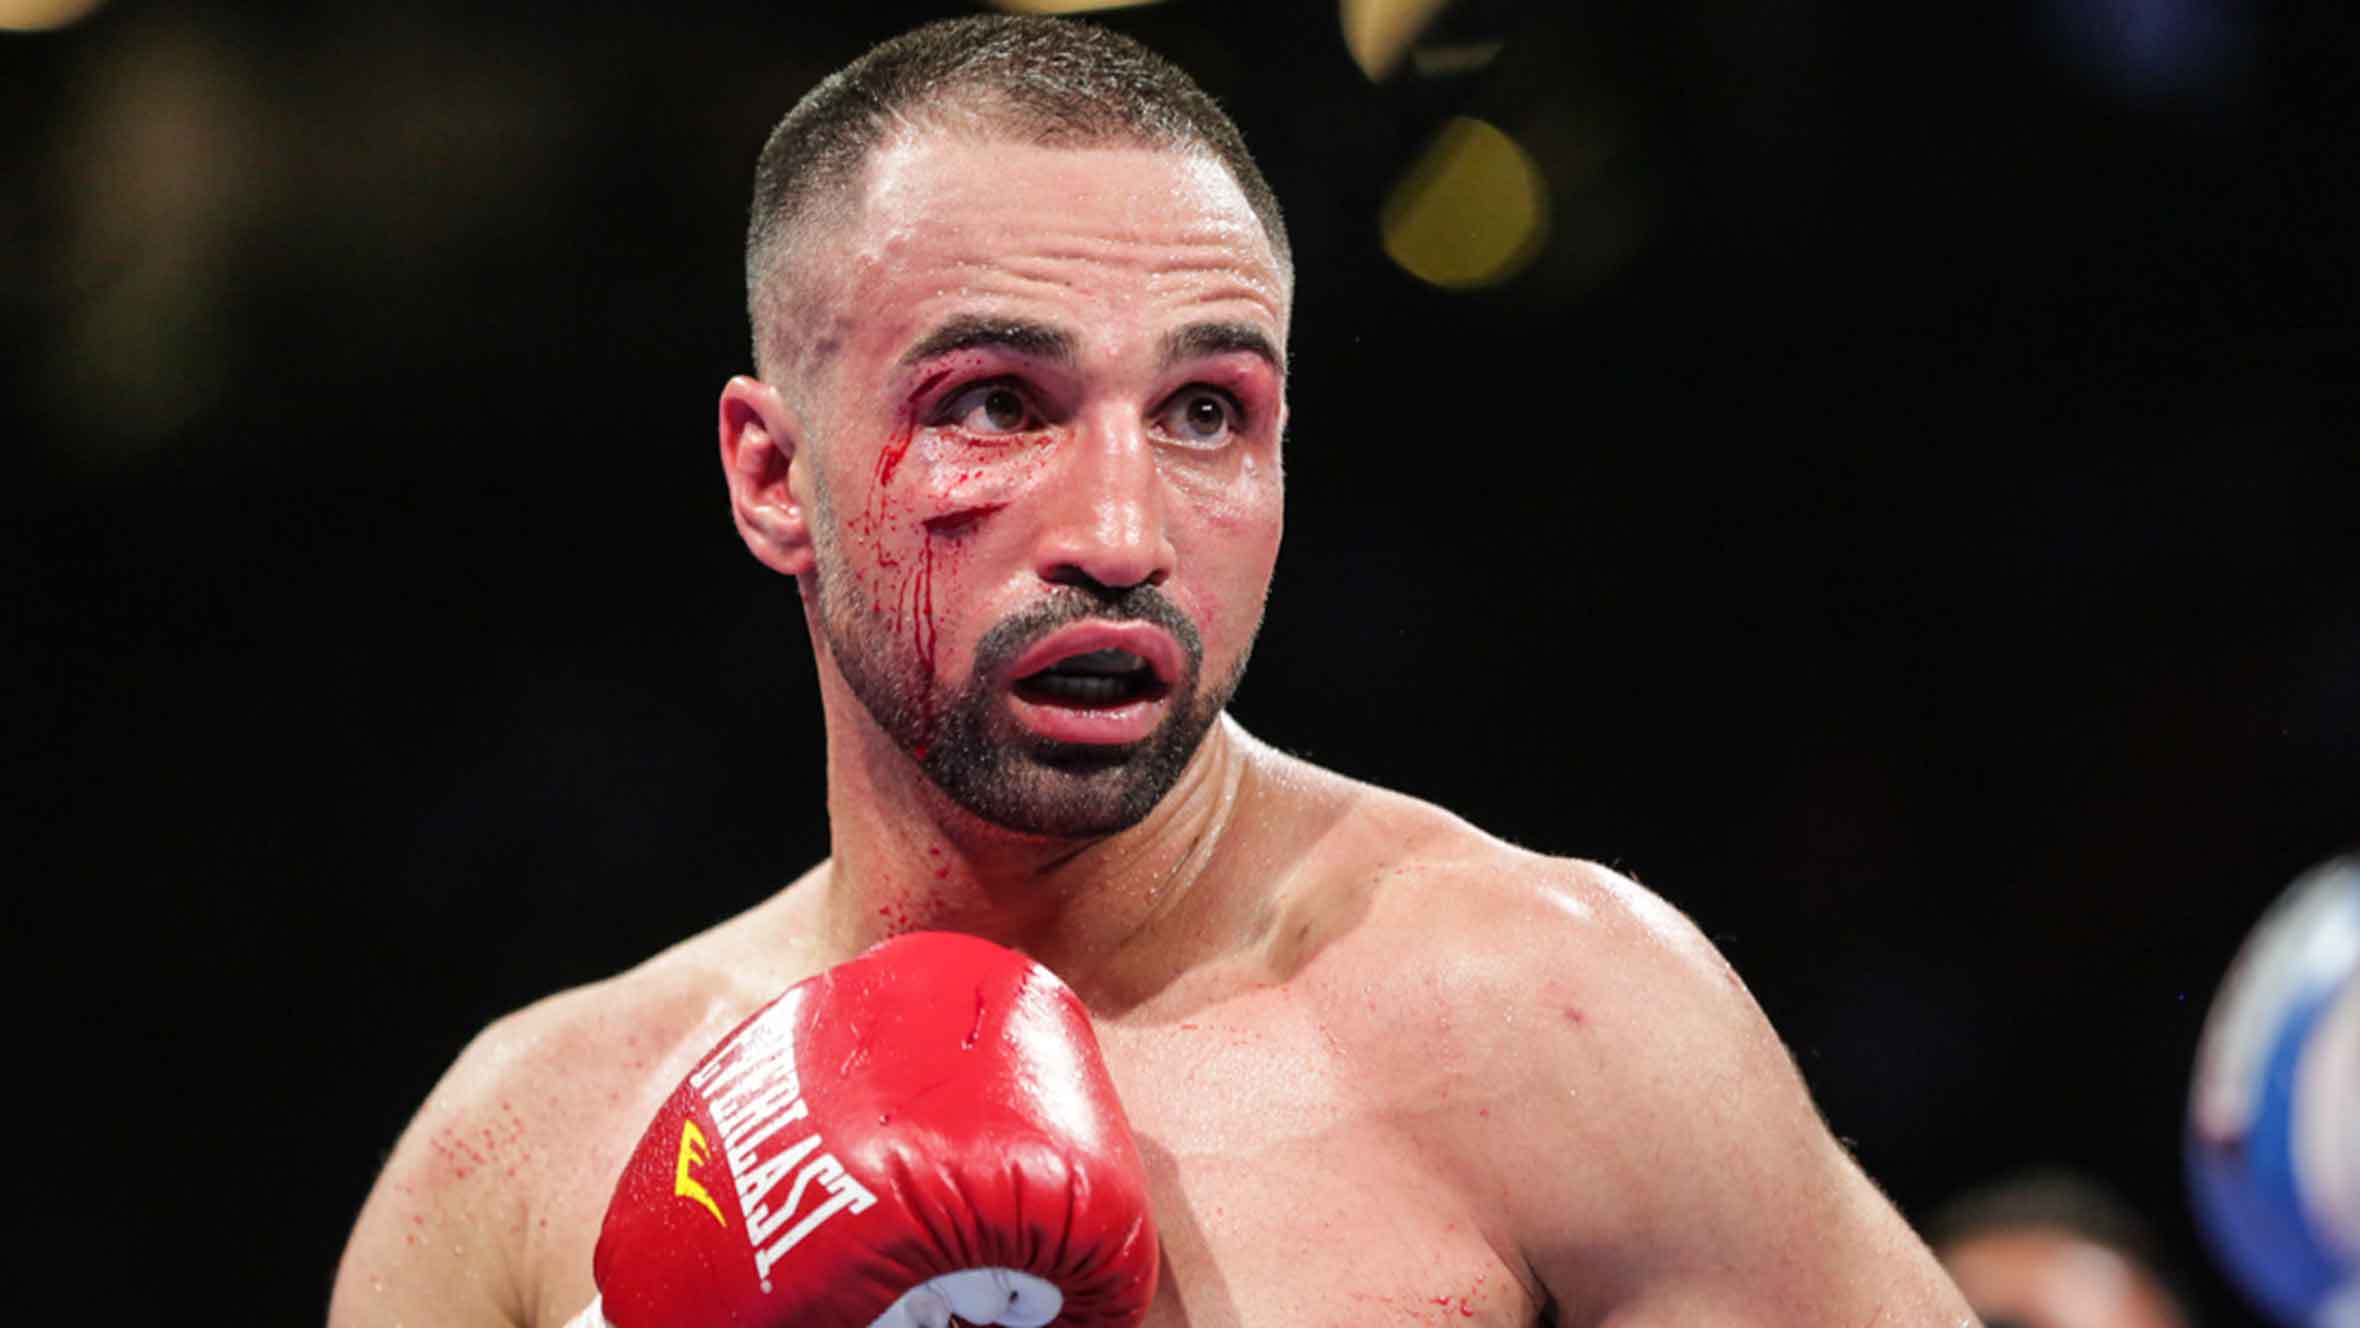 For Brooklyn’s Paulie Malignaggi, the road likely ends in the same place it started2360 x 1328